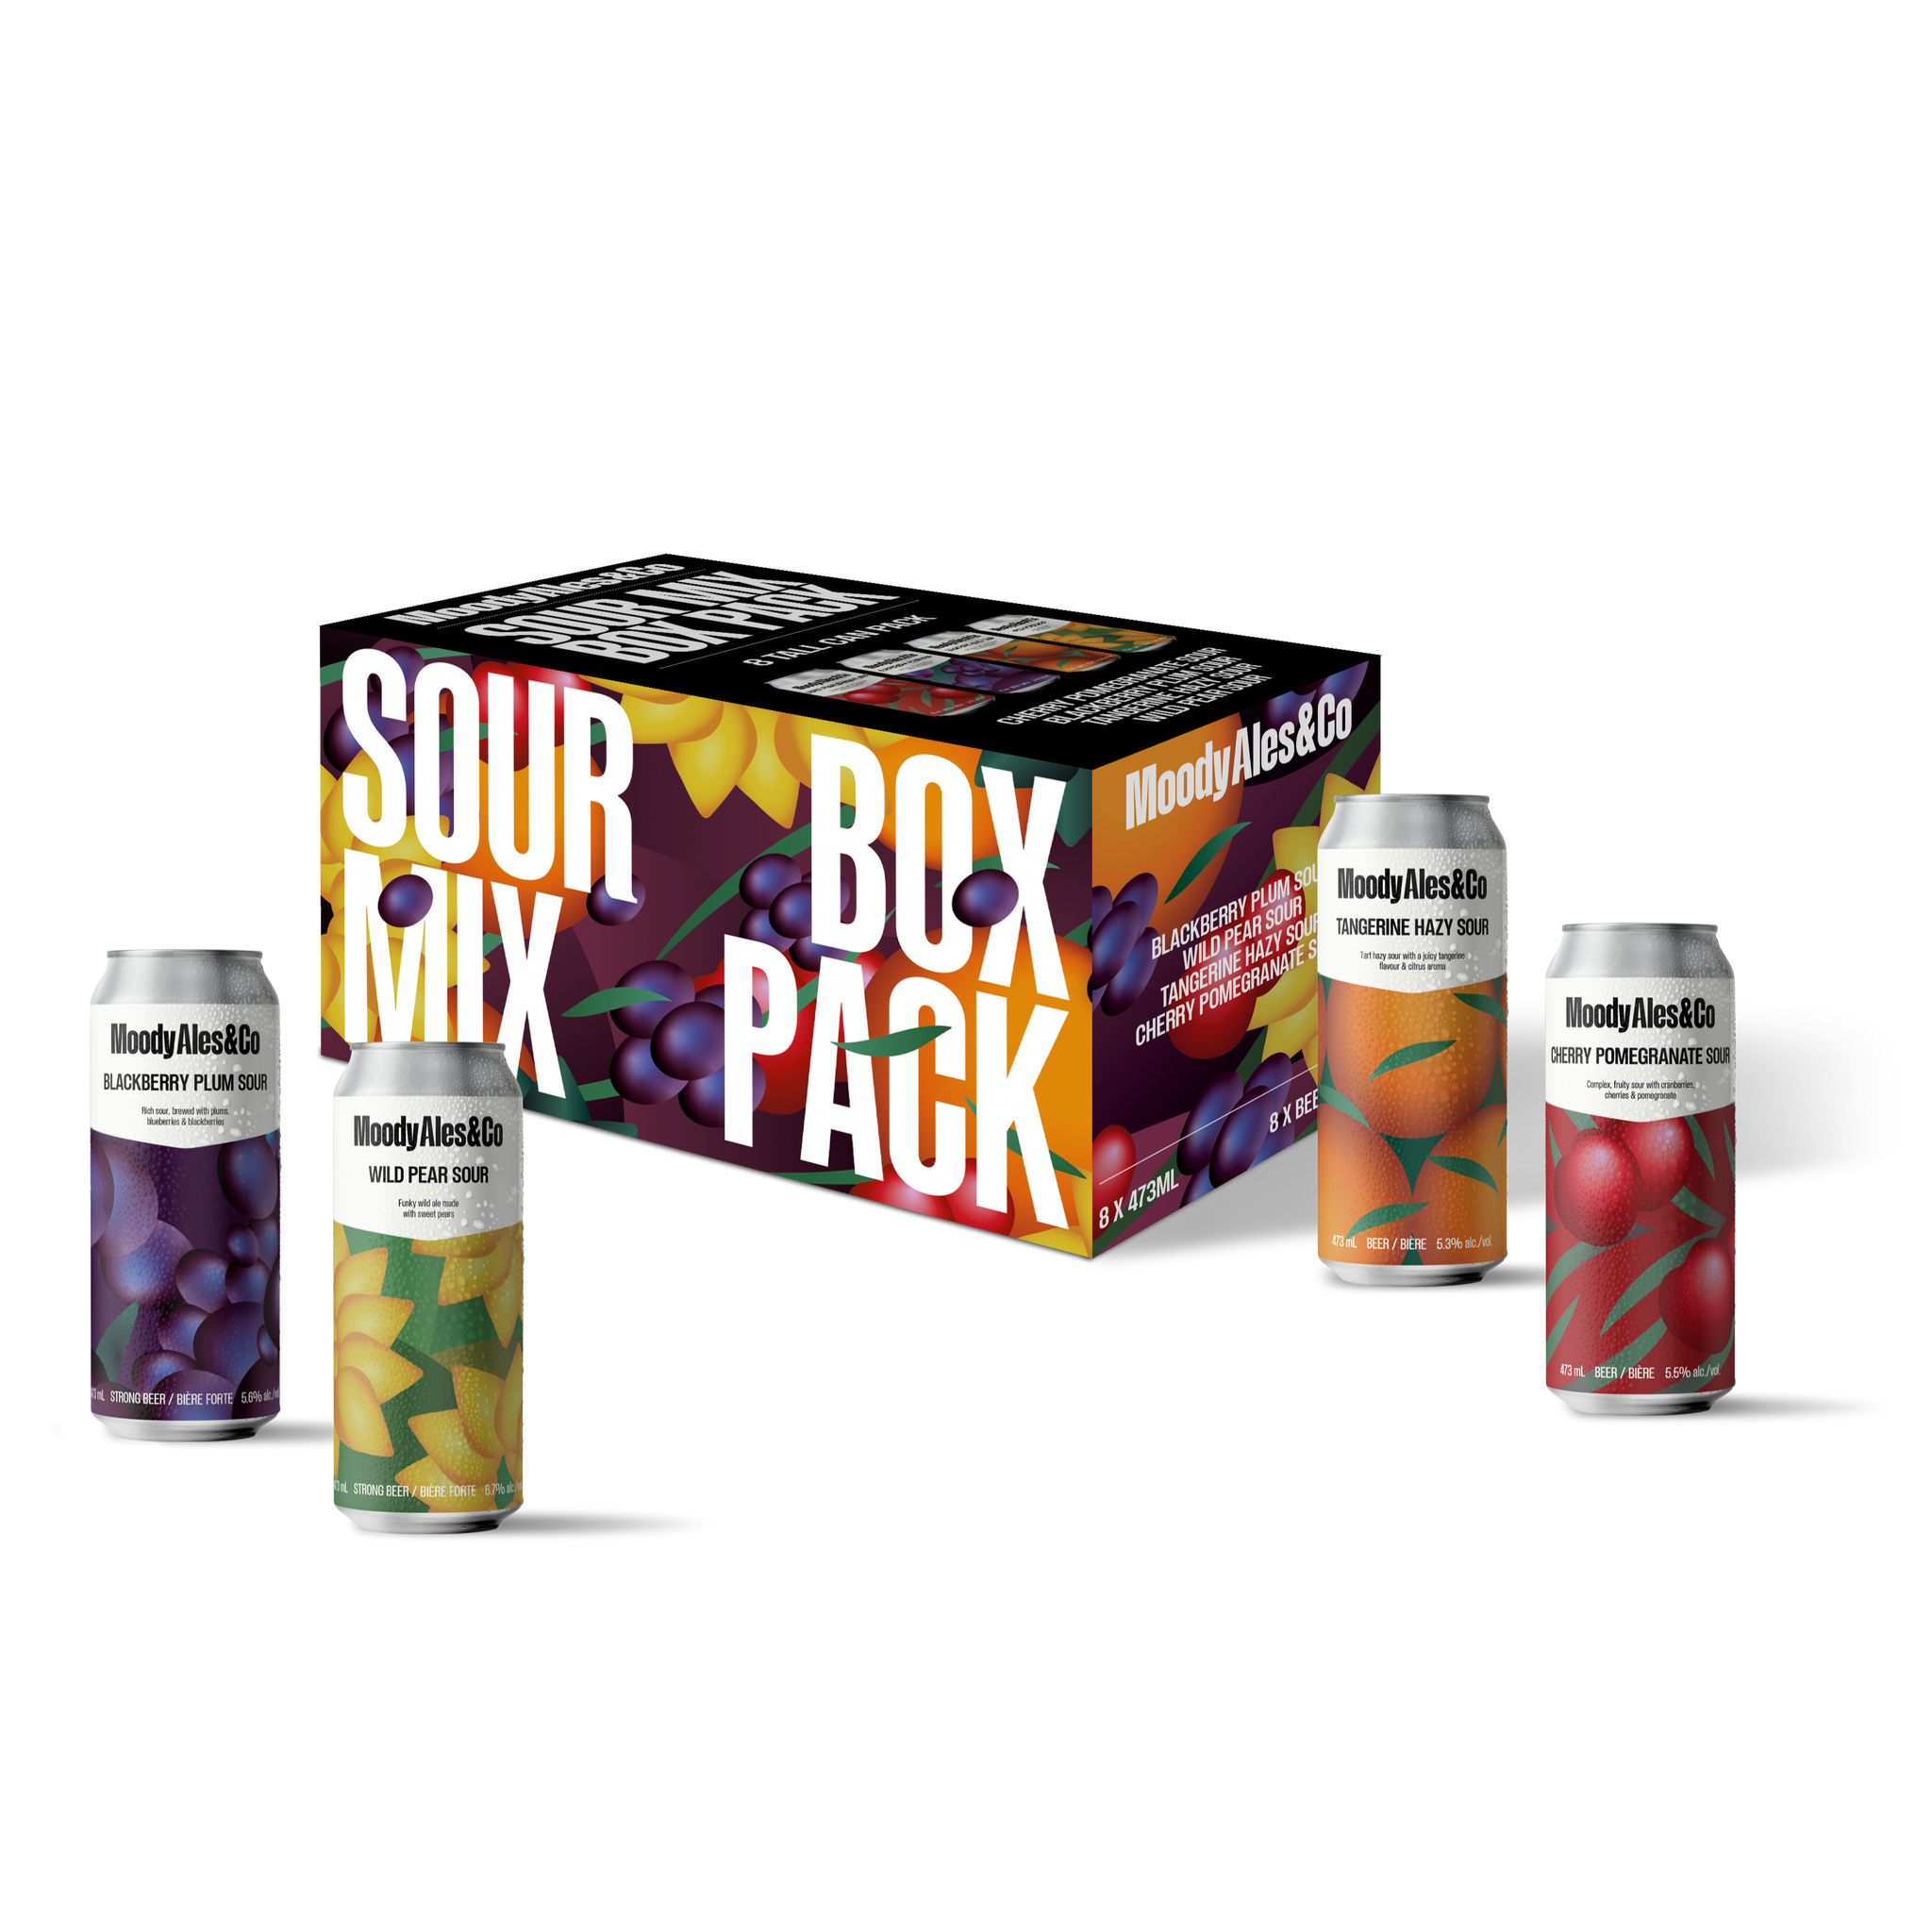 sour mix box pack with cans